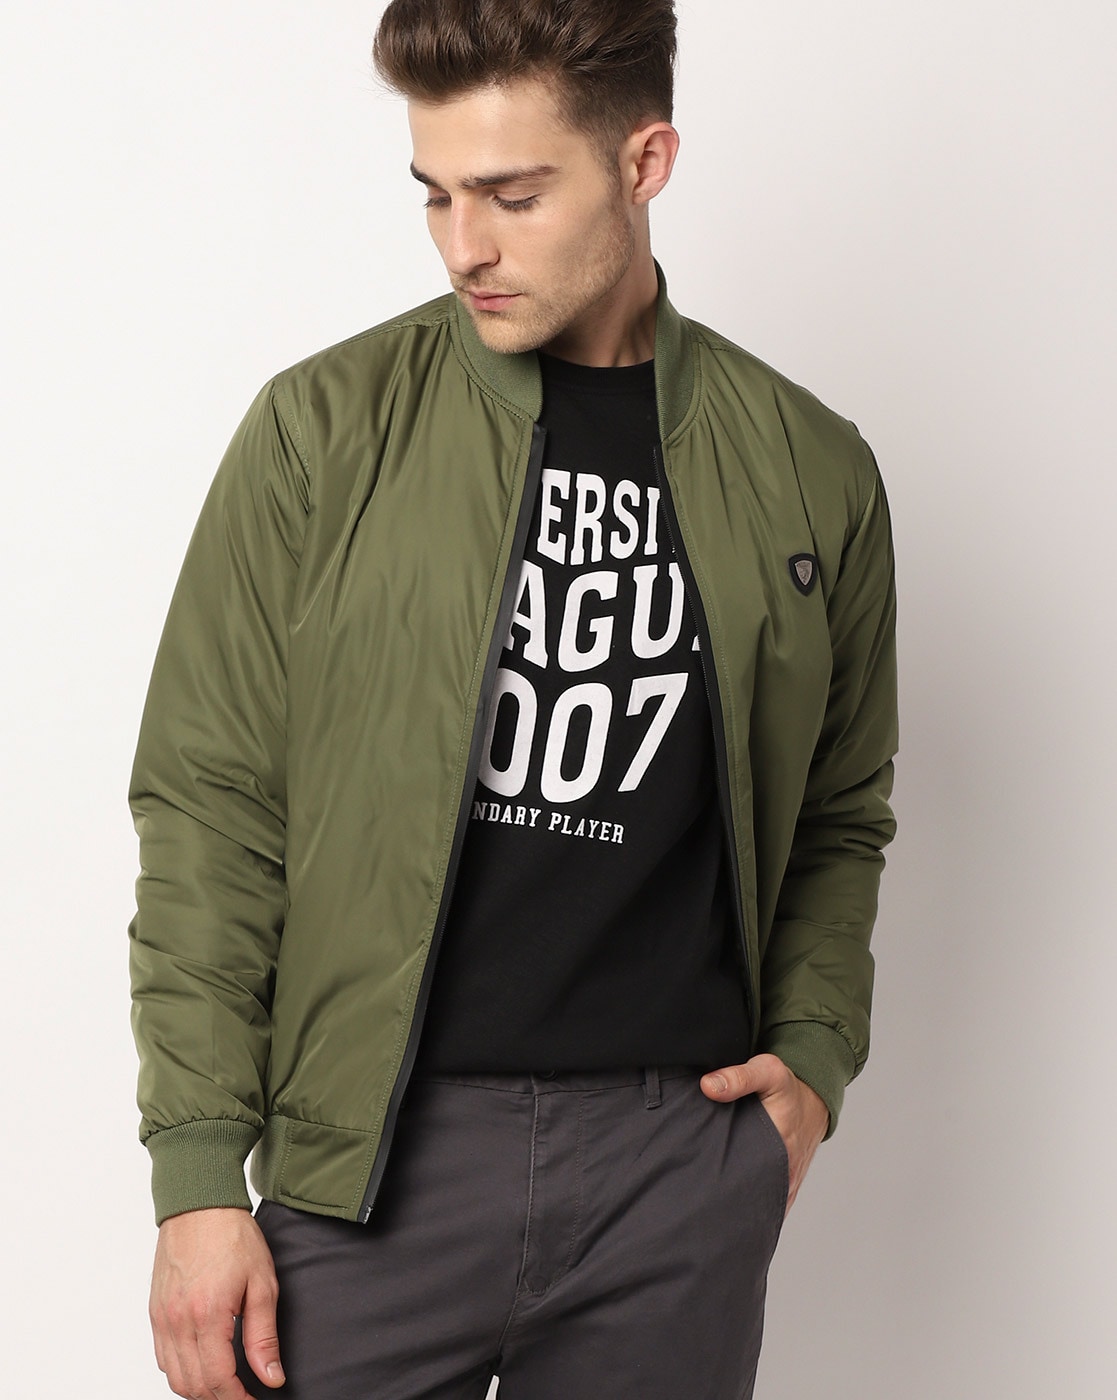 Bomber Jacket Men's Wear | Max Fashion | jacket | Bomber jackets are cool.  Bomber jackets in suede, even cooler. 😎​ Grab this OG look at a Max  Fashion store near you,